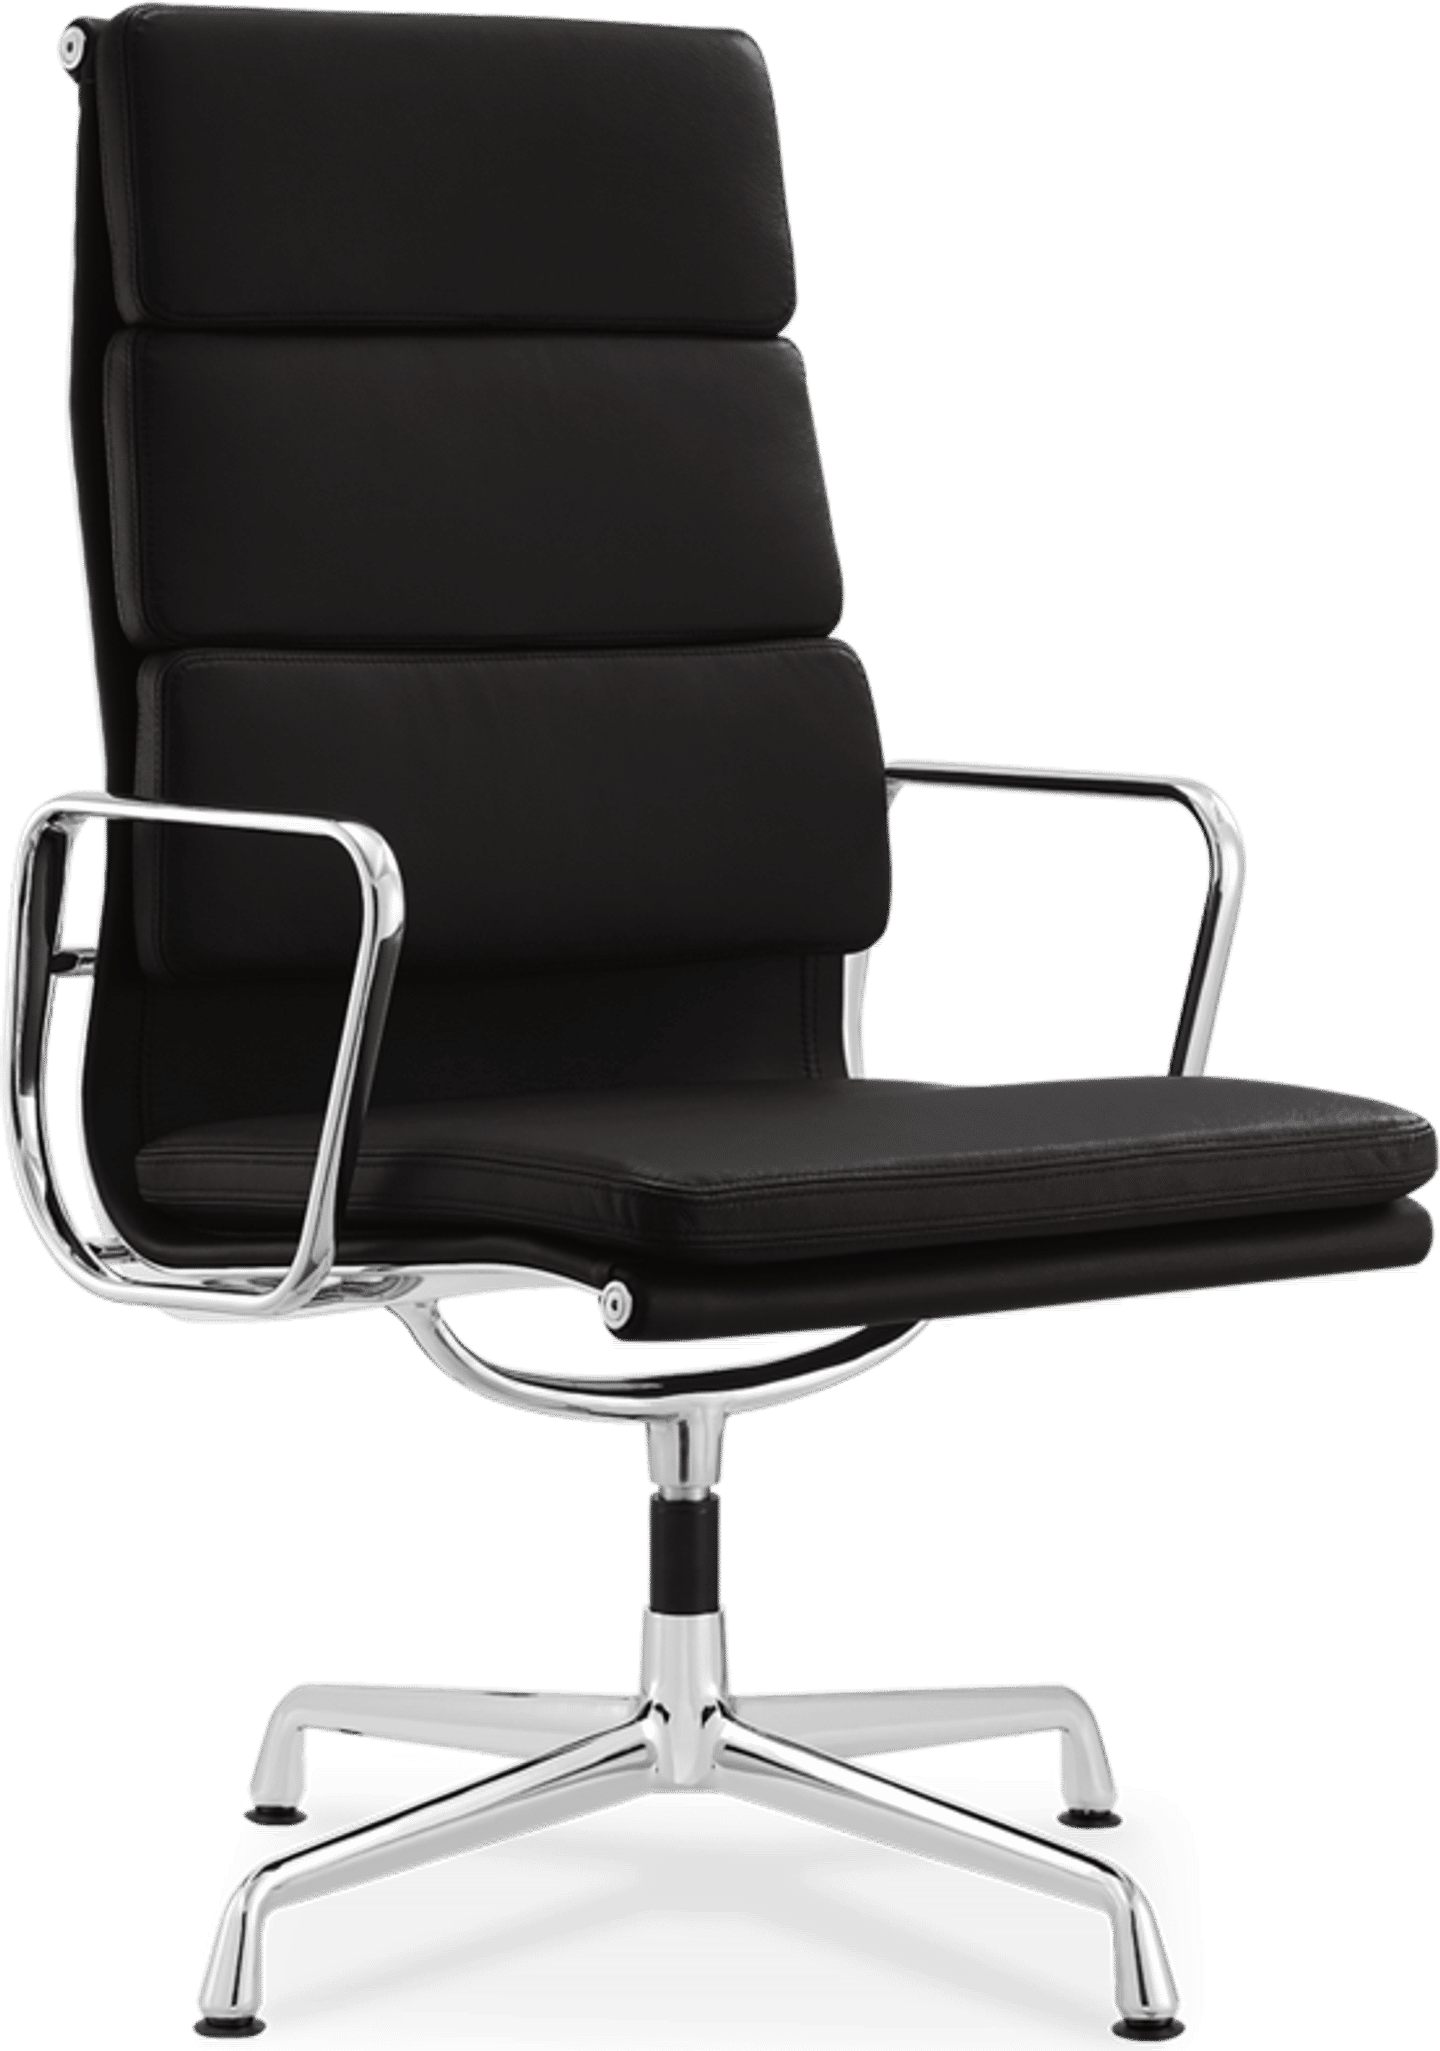 Eames Style Soft Pad Office Chair EA215 Black image.